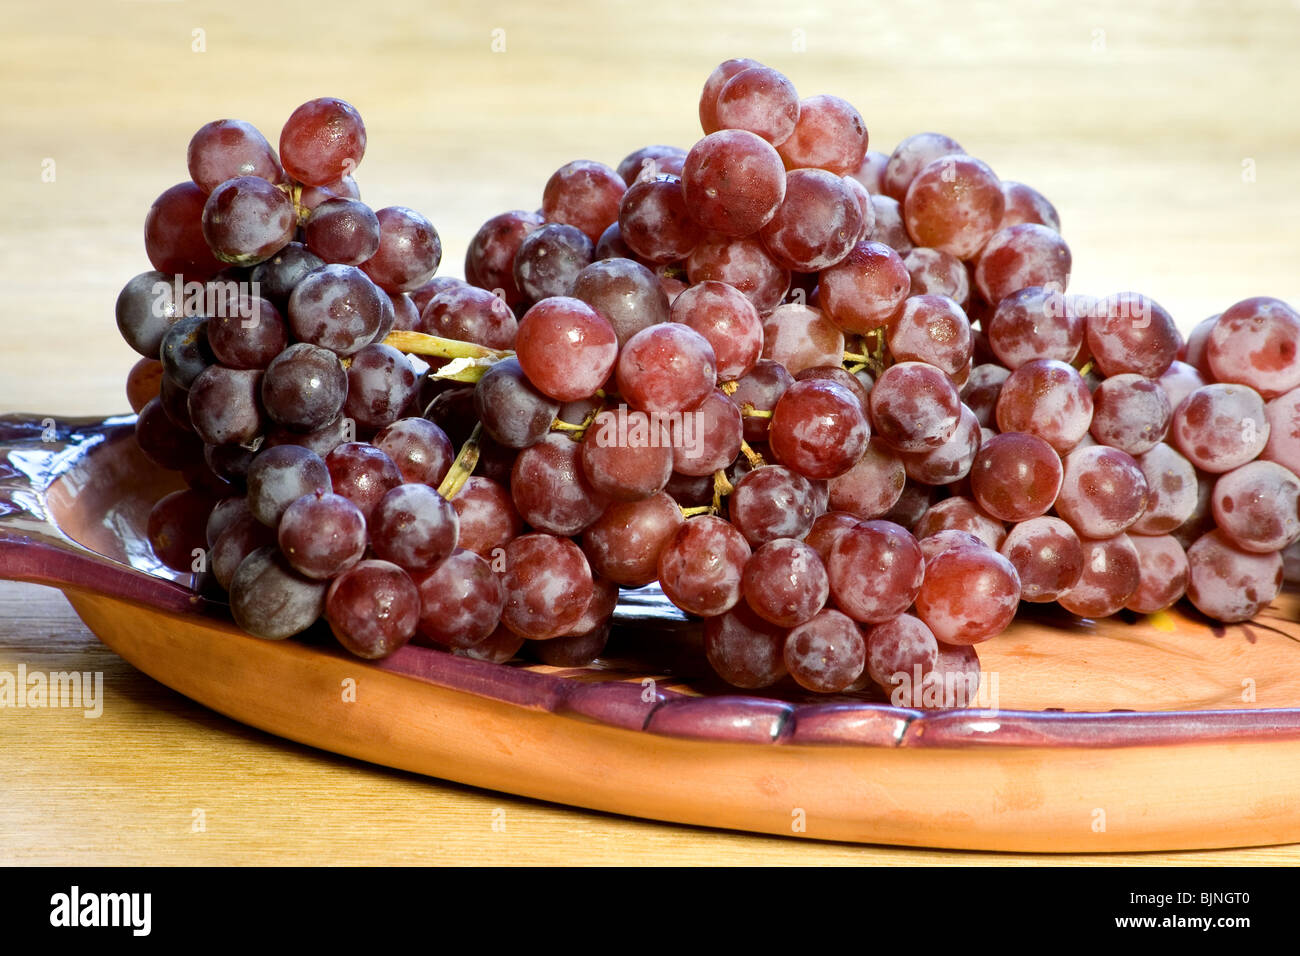 Red grapes in a dish Stock Photo